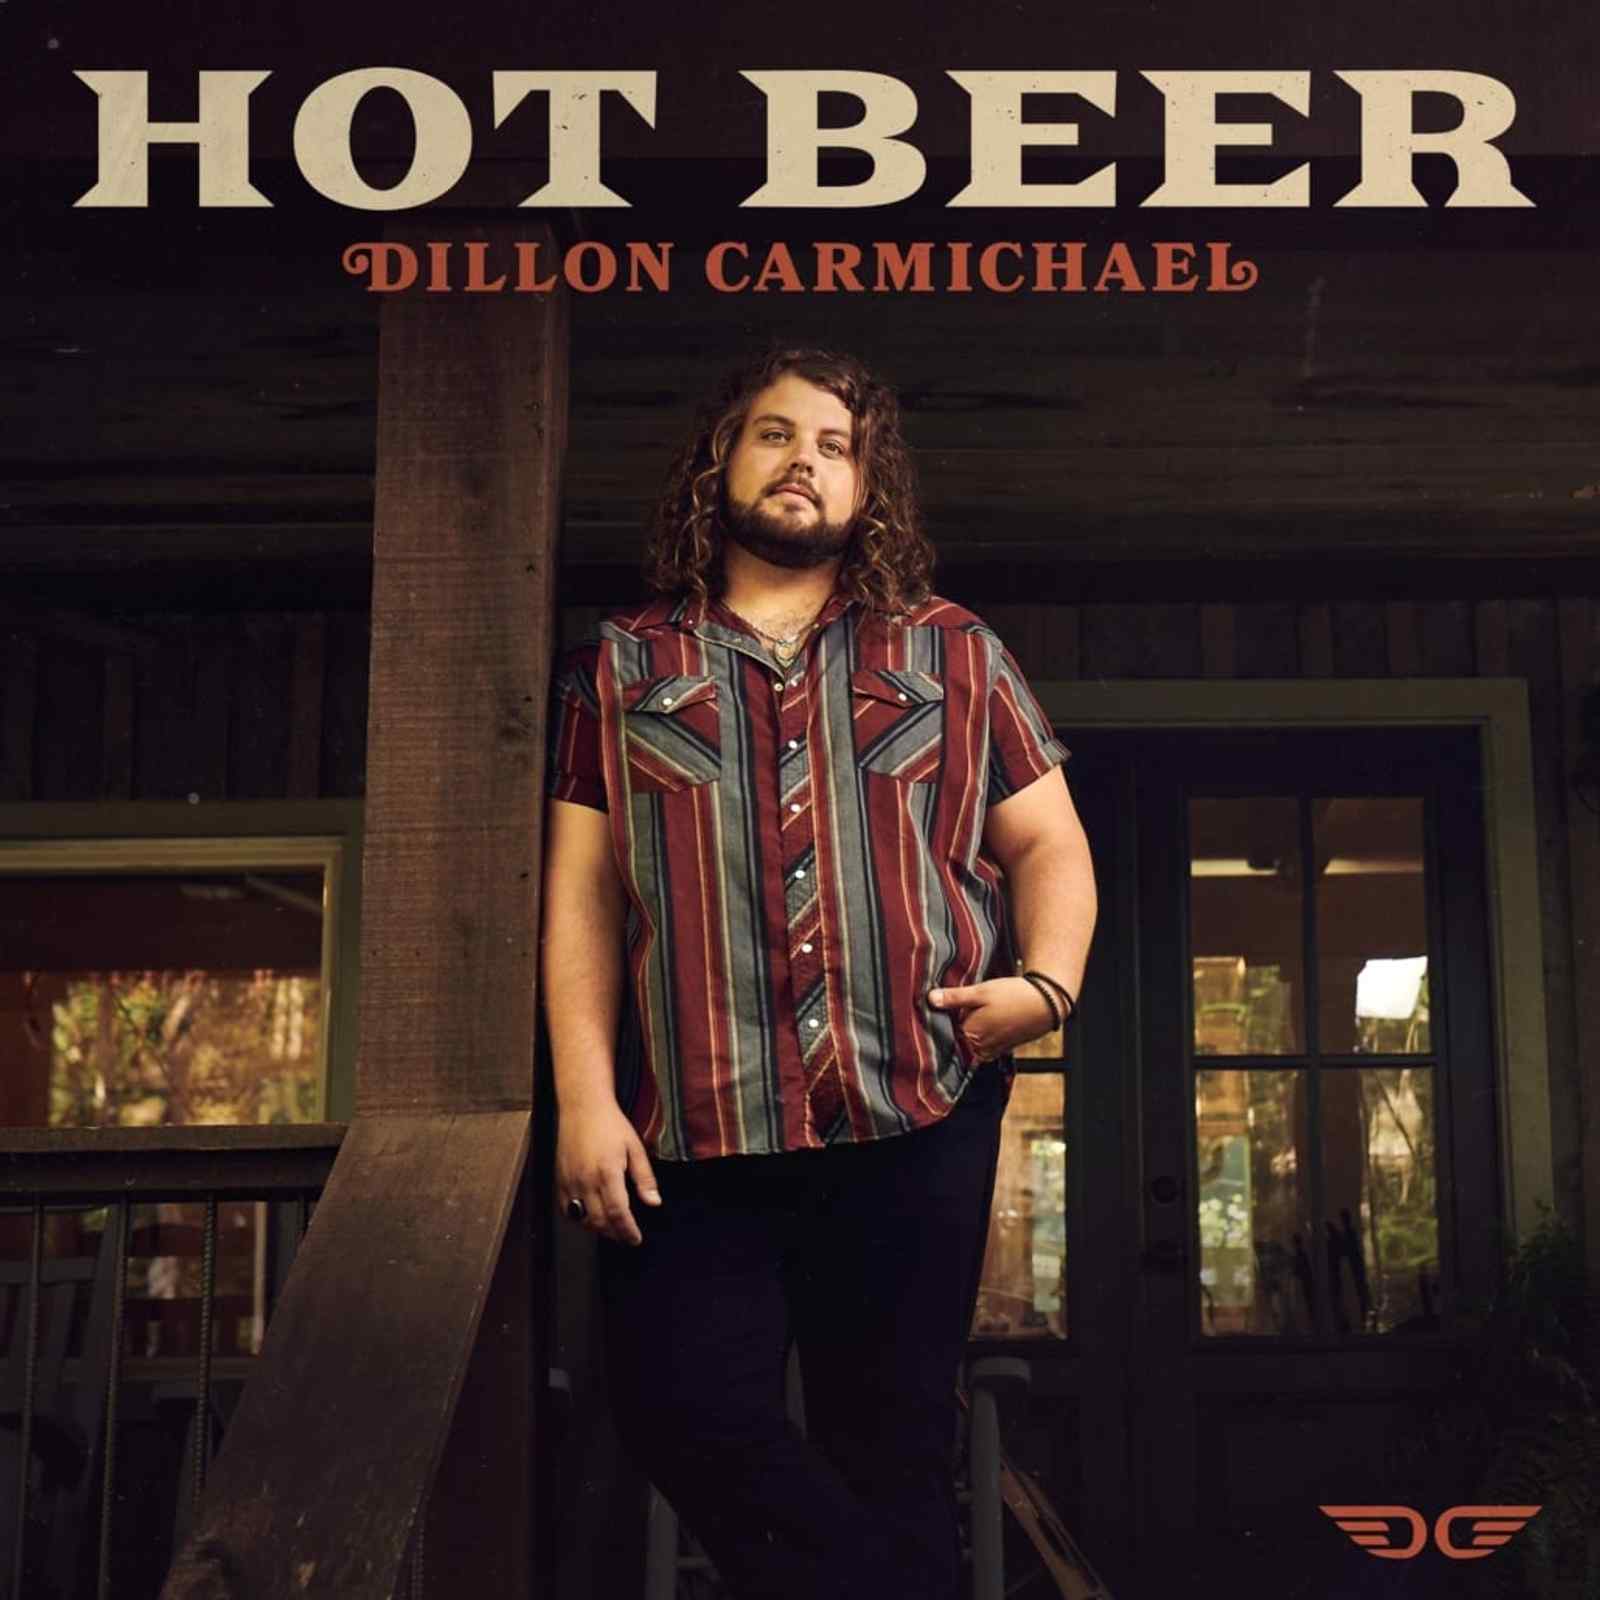 "Hot Beer" EP by Dillon Carmichael